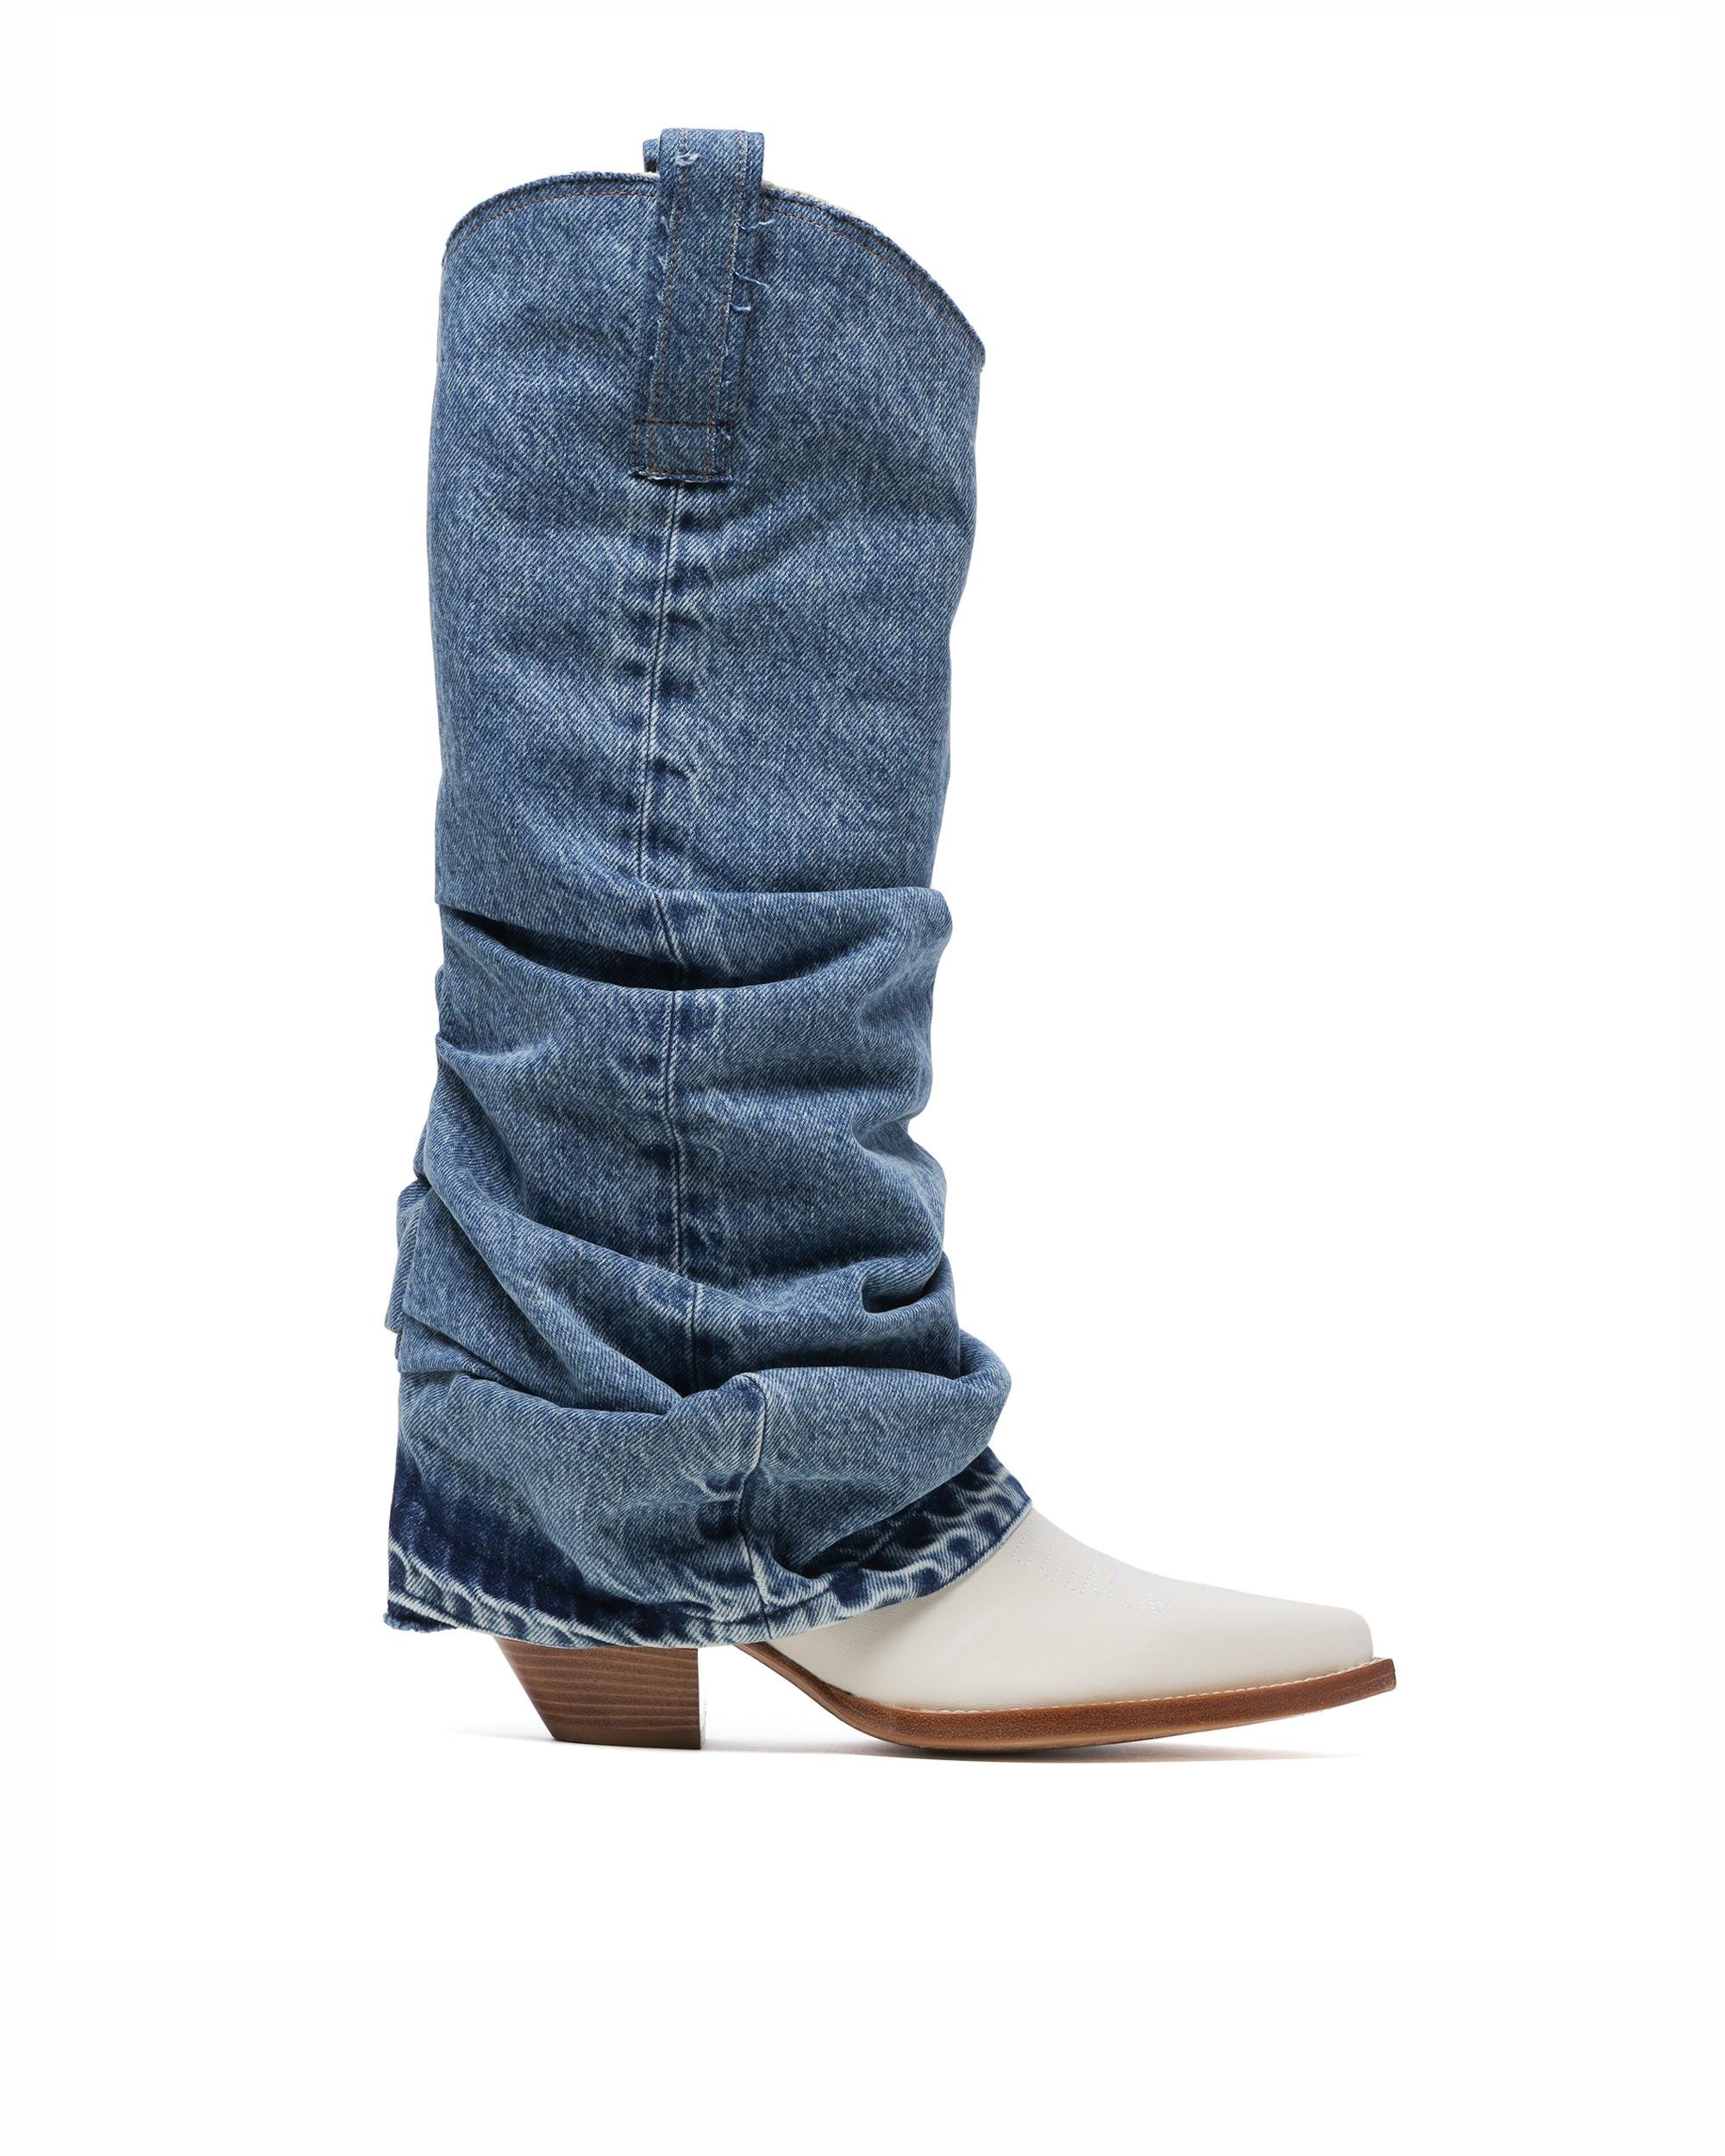 Mid cowboy boots with denim sleeves by R13